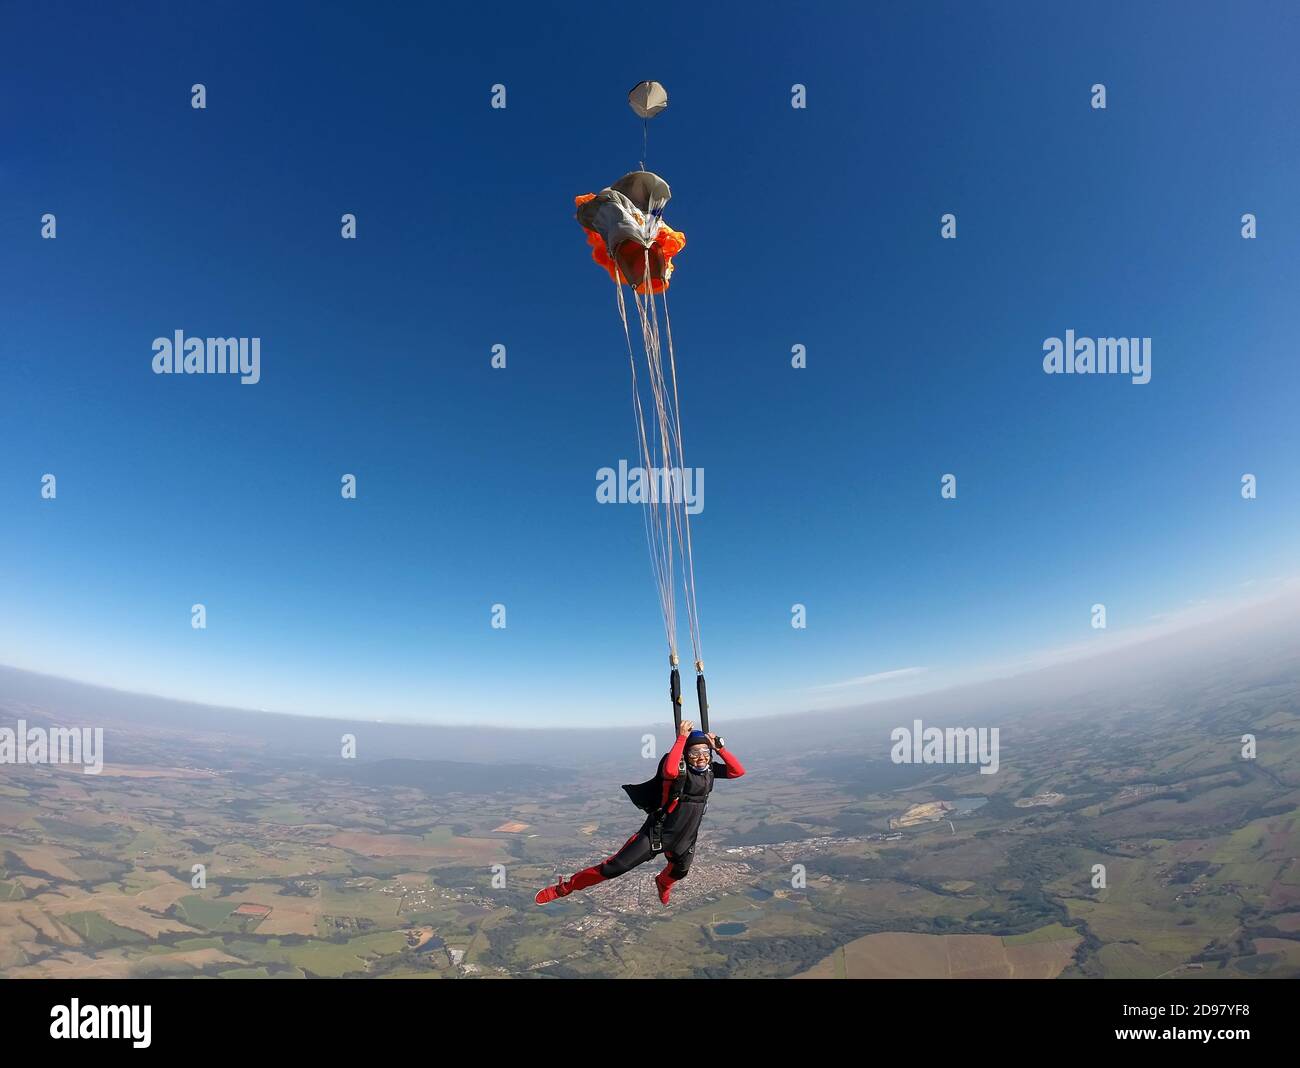 Smiling black woman jumping from parachute Stock Photo